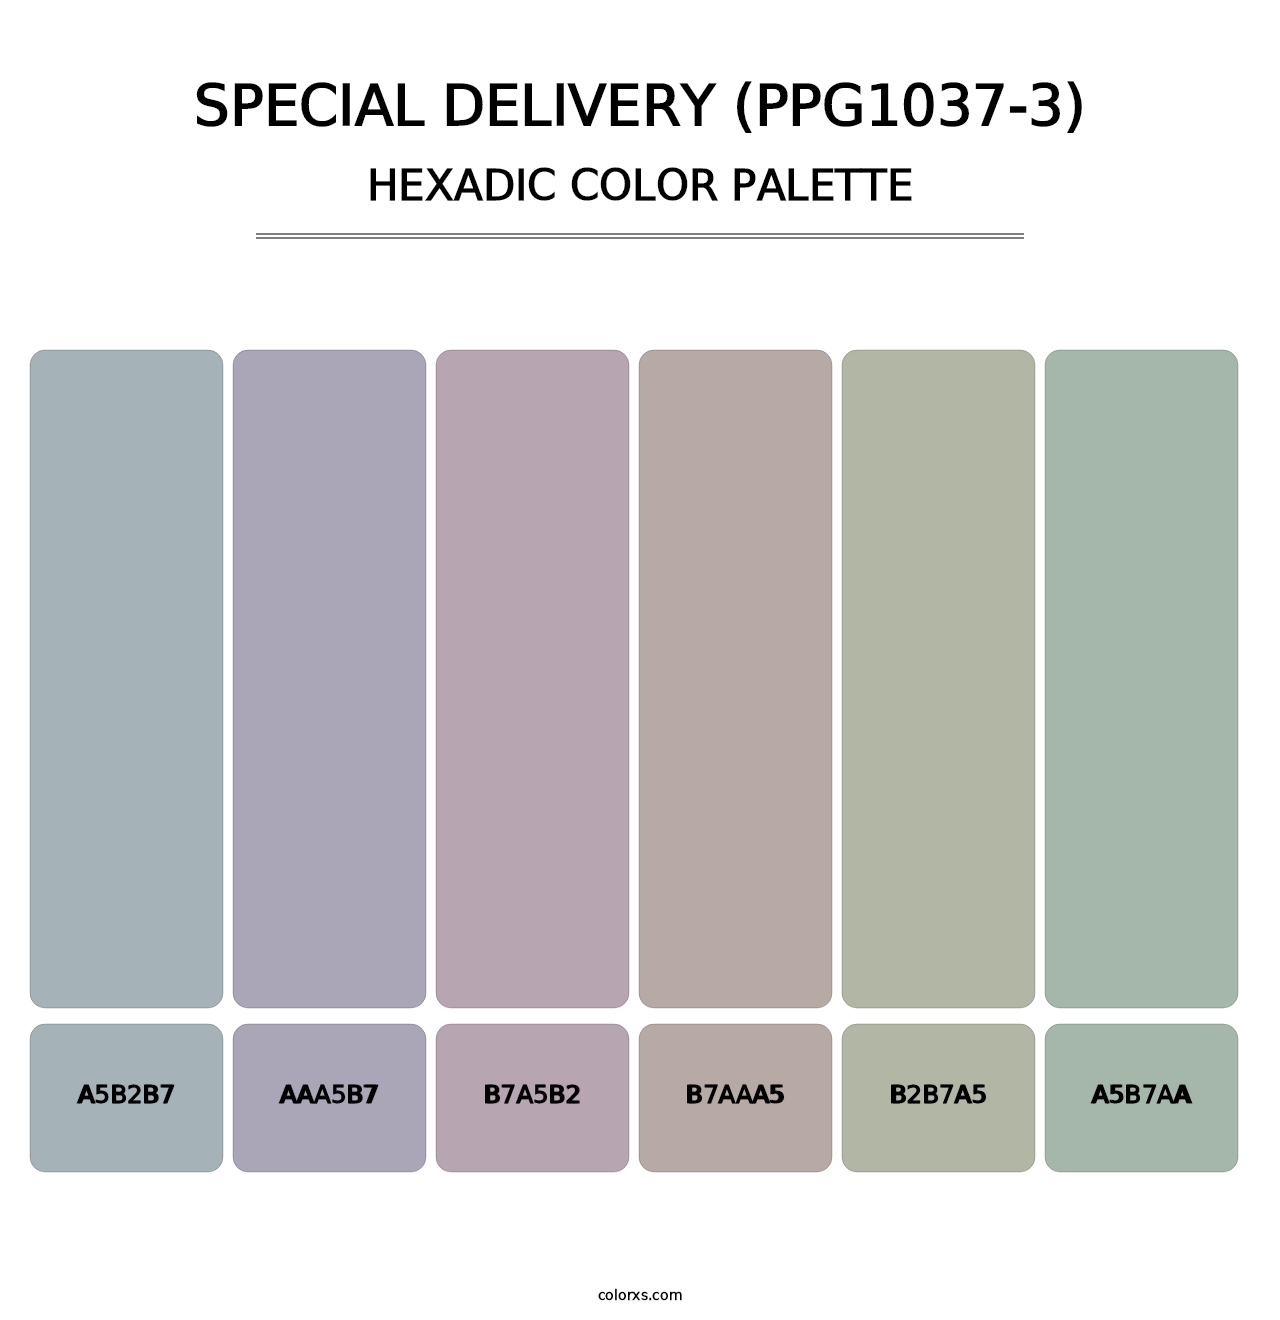 Special Delivery (PPG1037-3) - Hexadic Color Palette